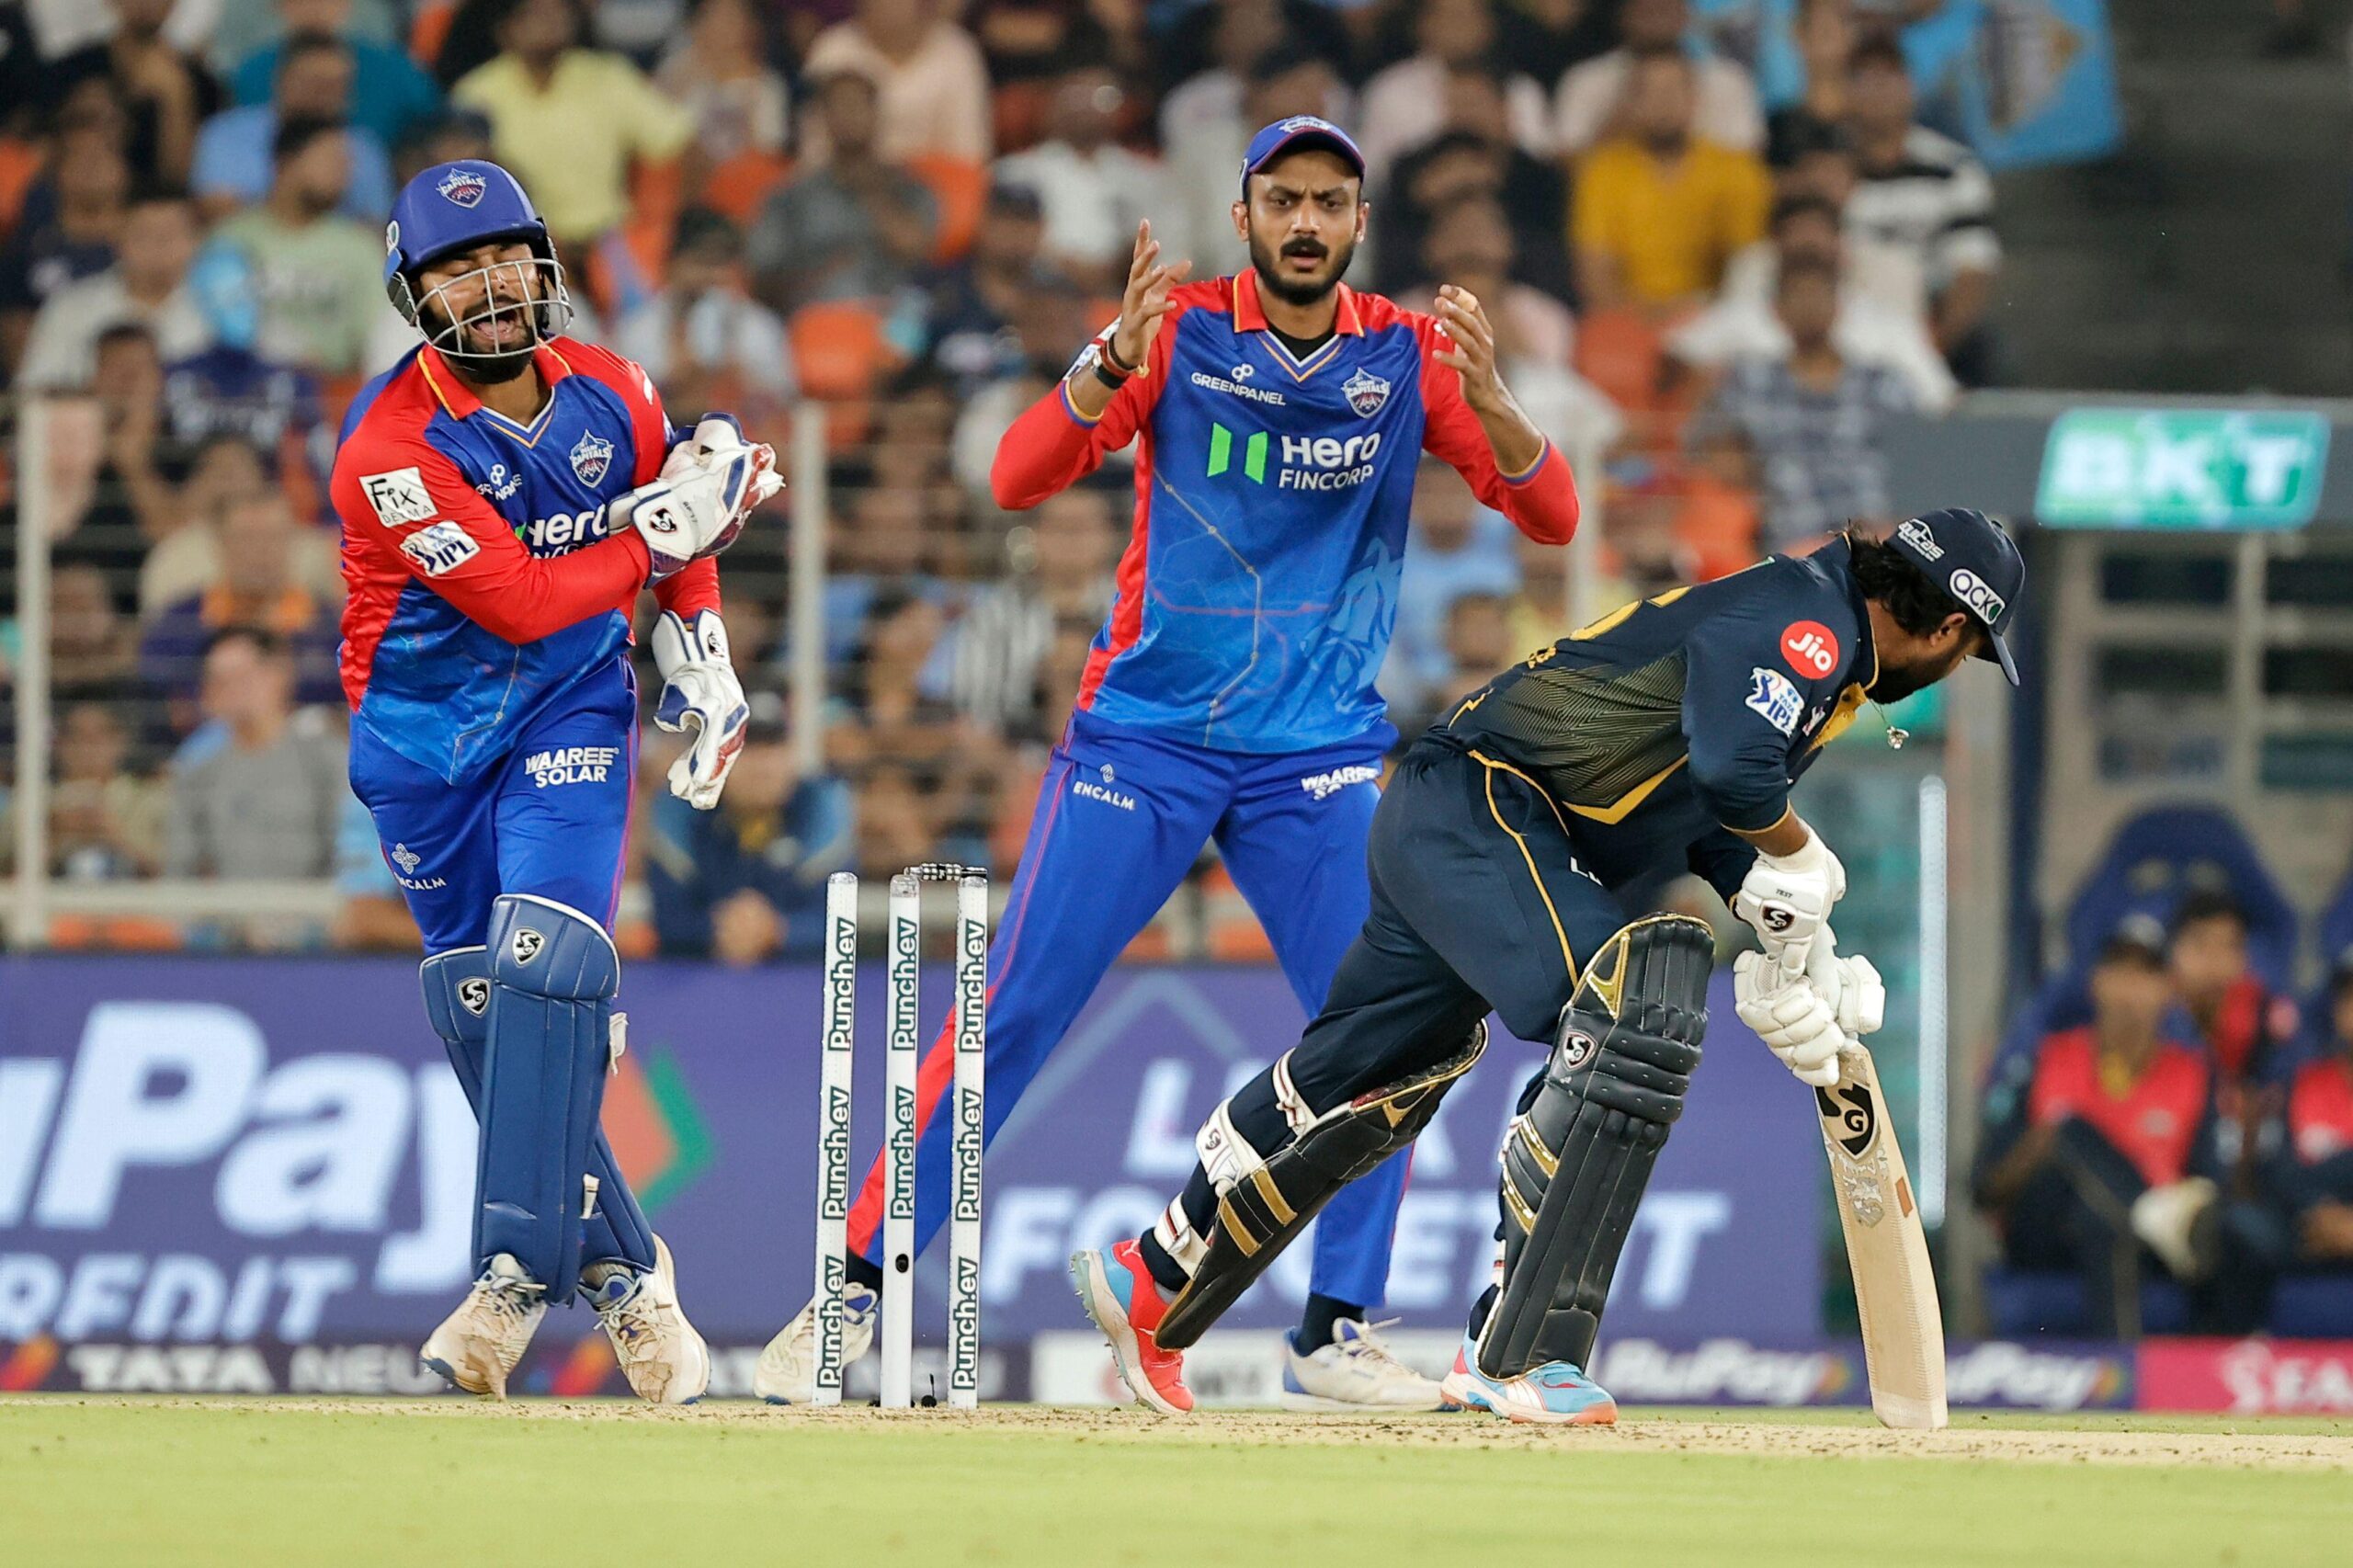 "Rishabh Pant Ties DK's Record for Most Dismissals in an IPL Innings